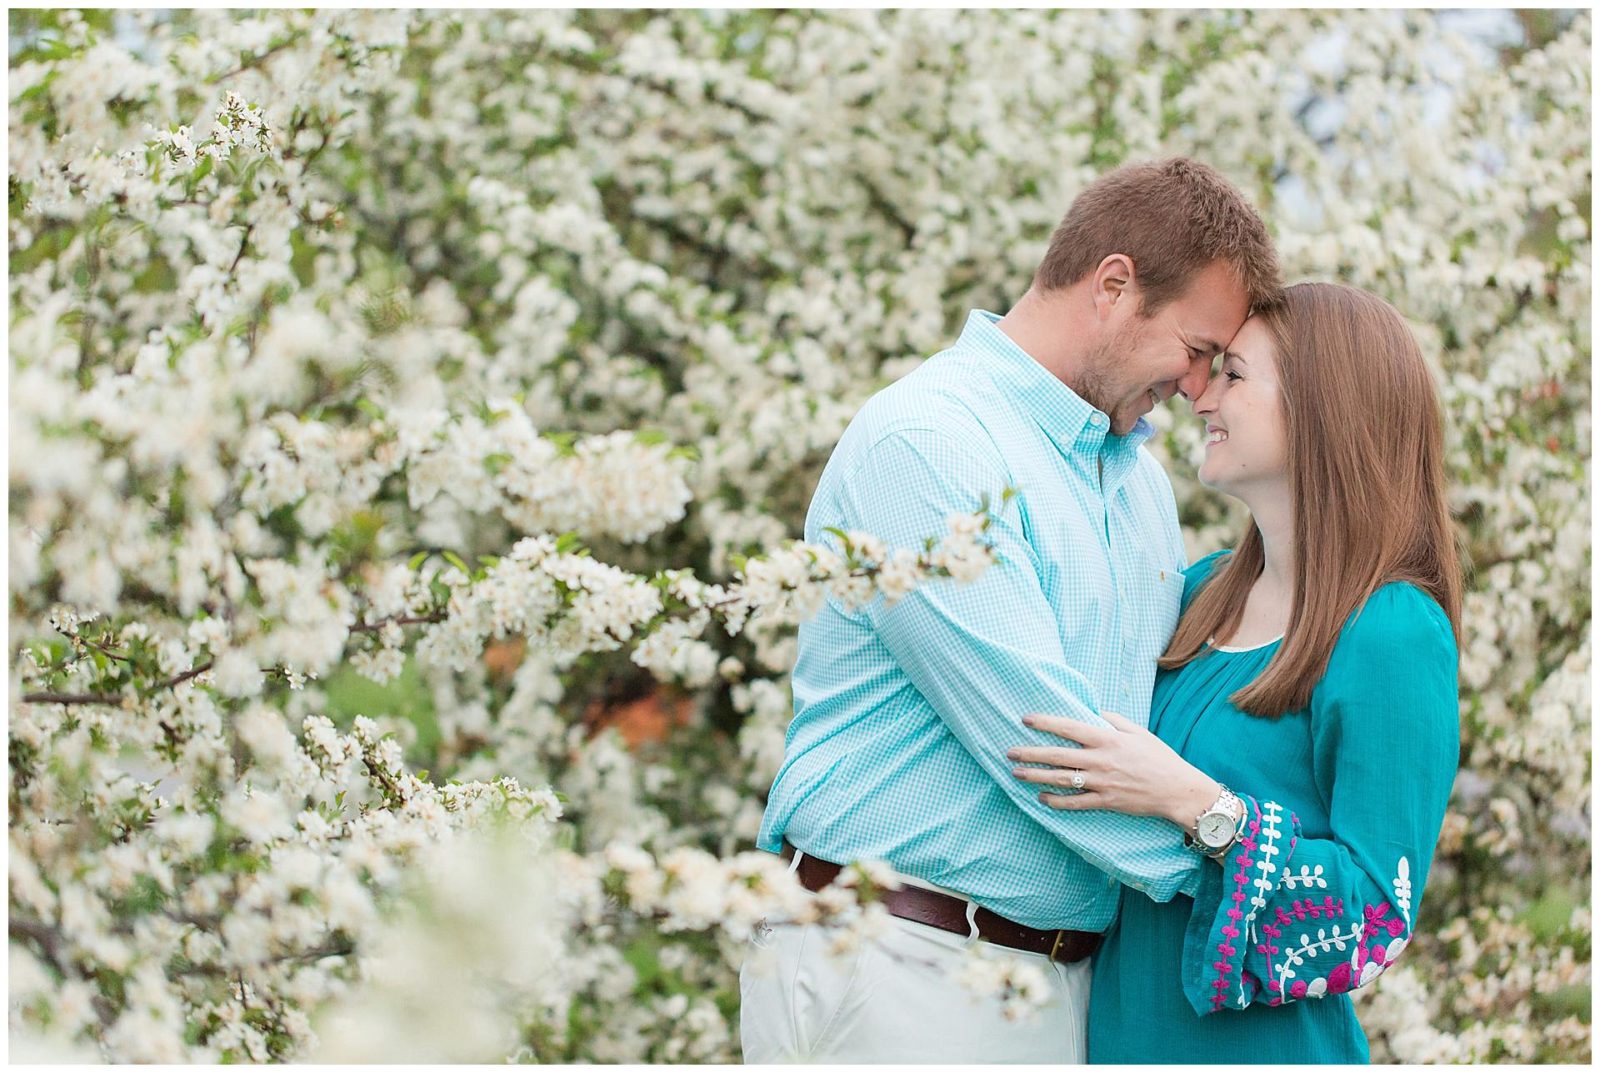 Couple surrounded by blooming trees during their engagement session at the University of Kentucky Arboretum.